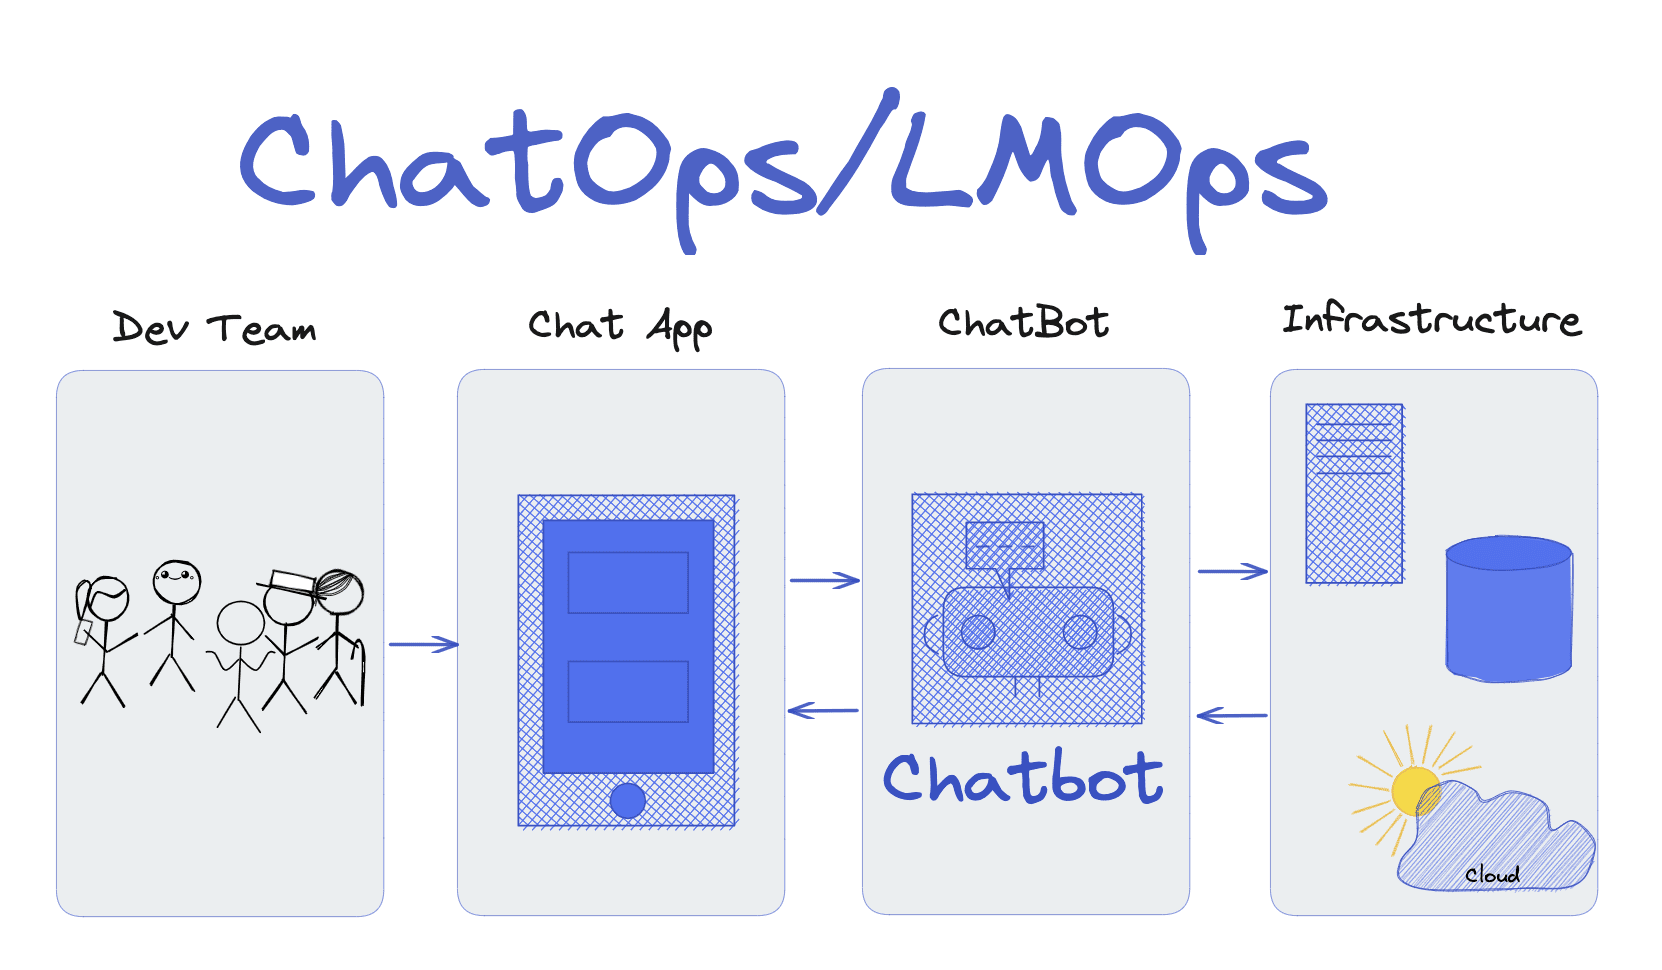 The Rise of ChatOps/LMOps